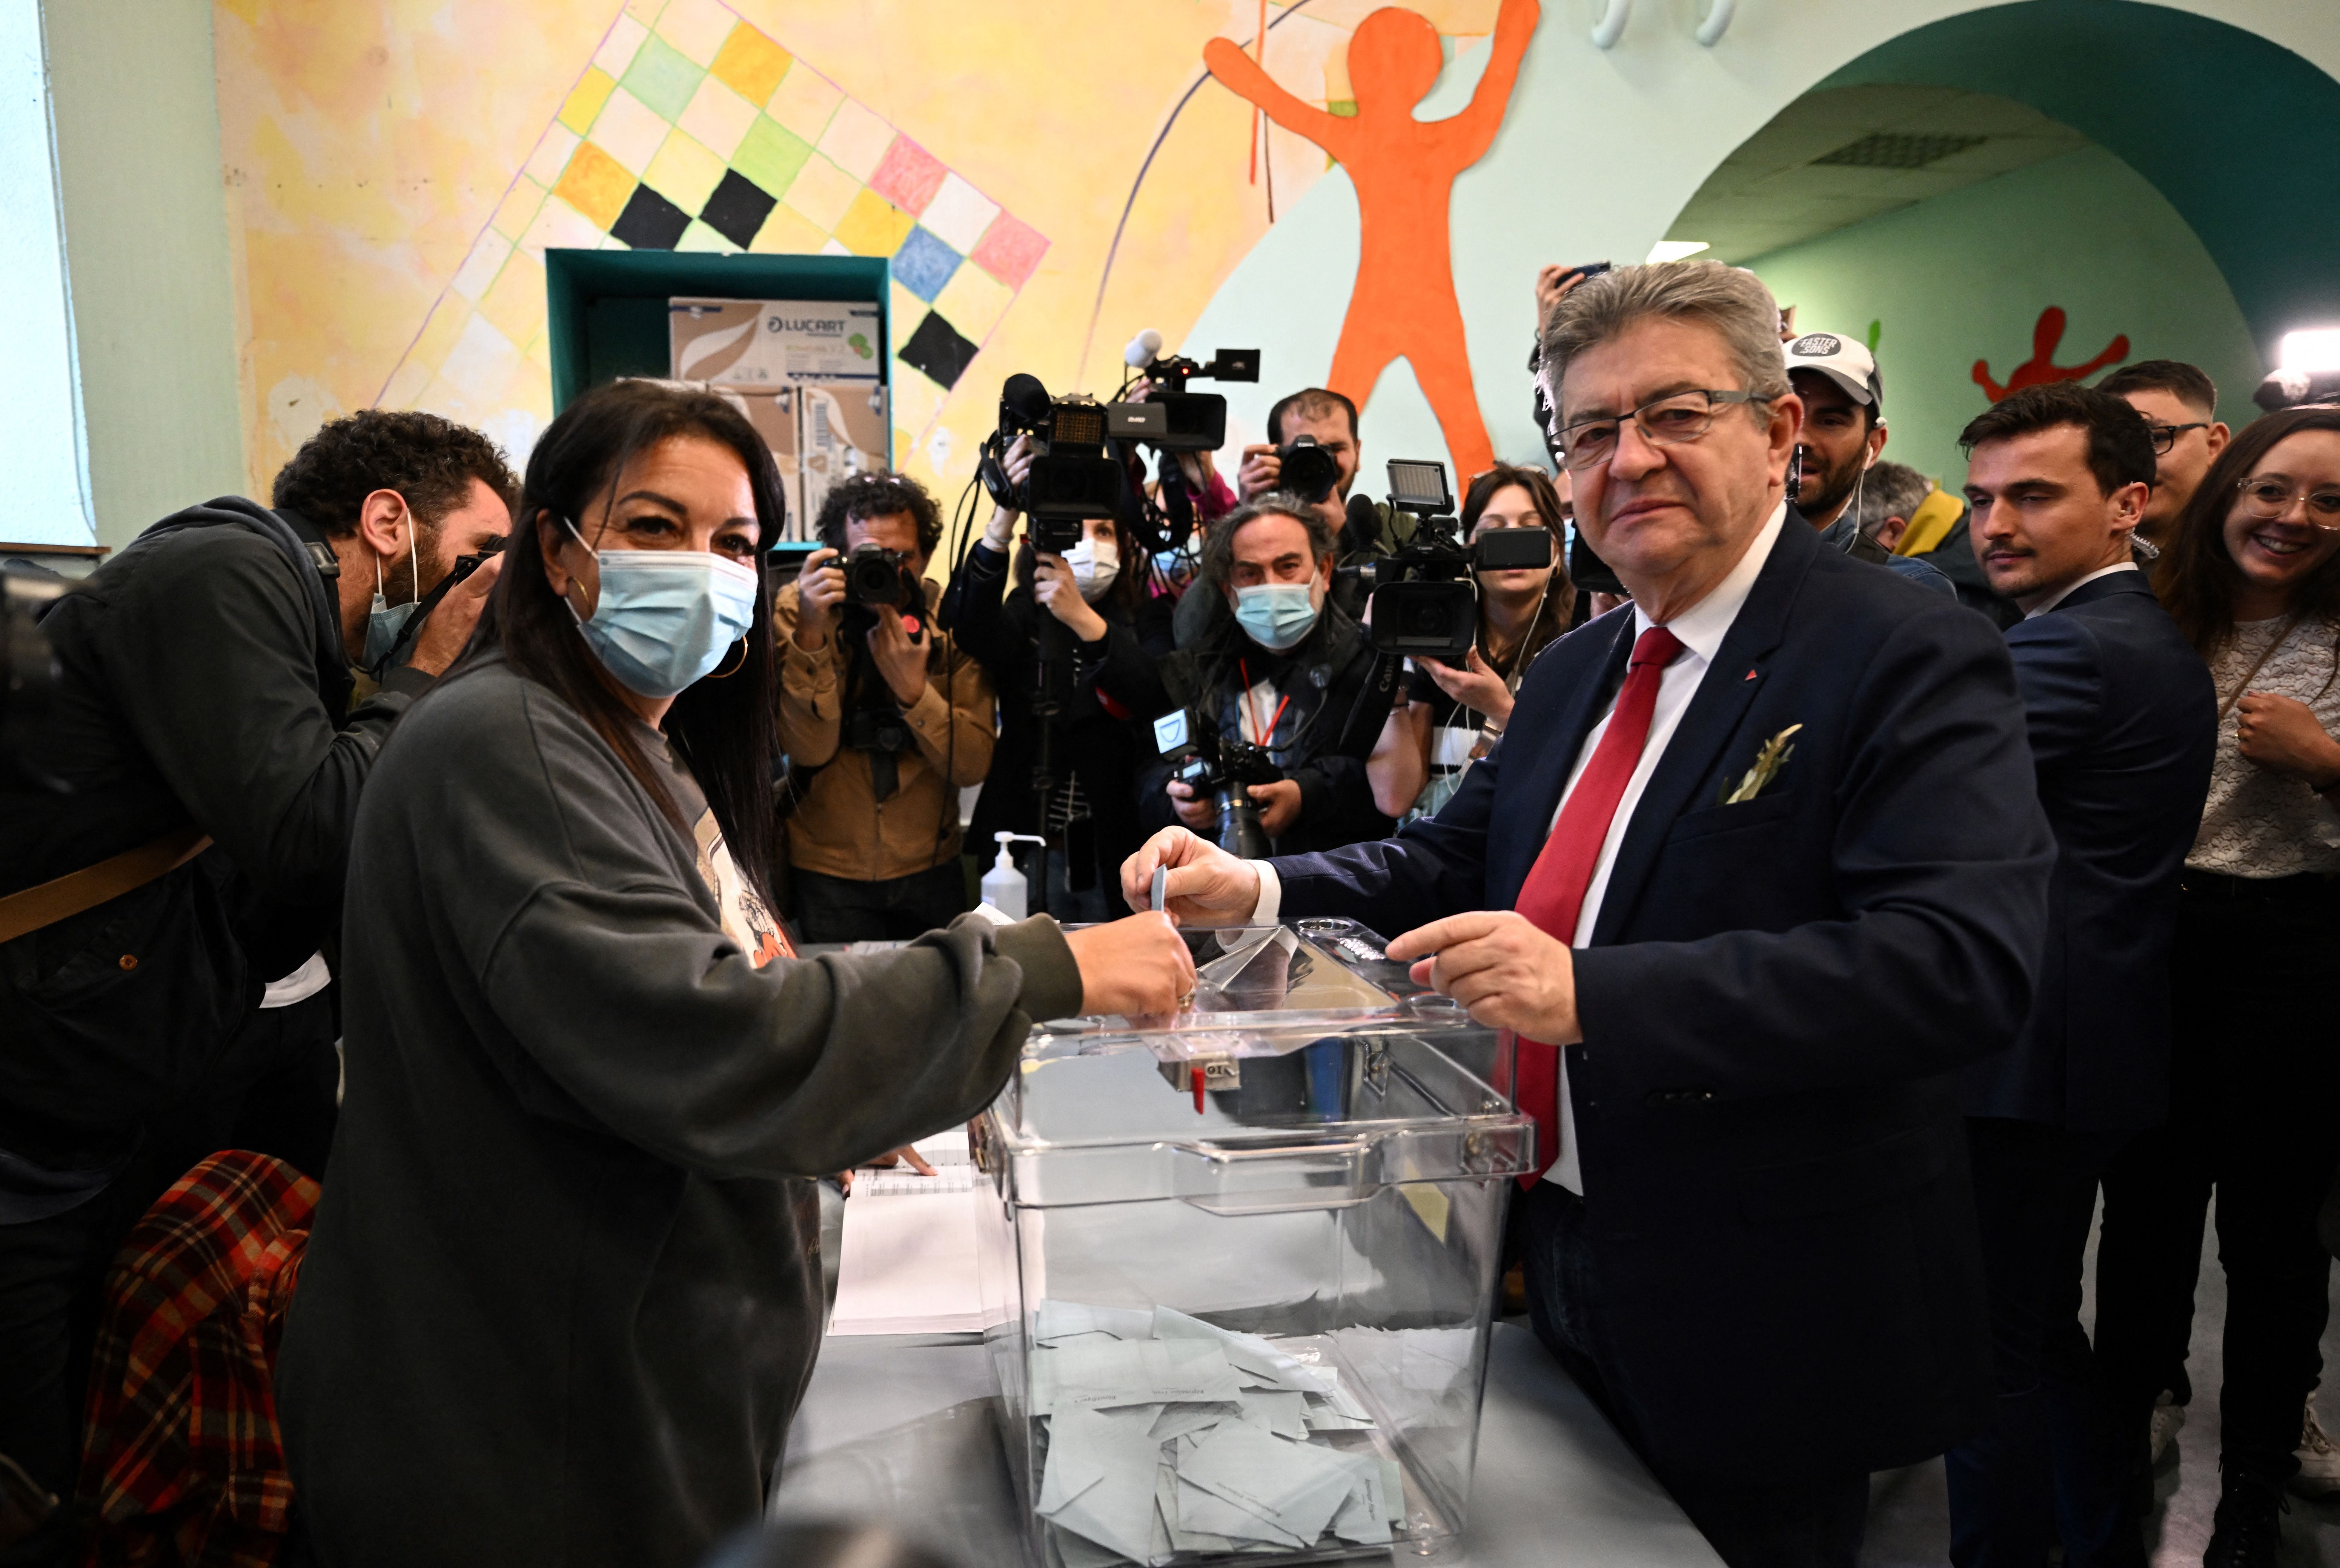 Jean-Luc Melenchon (R) casts his ballot for the first round of France’s presidential election at a polling station in Marseille